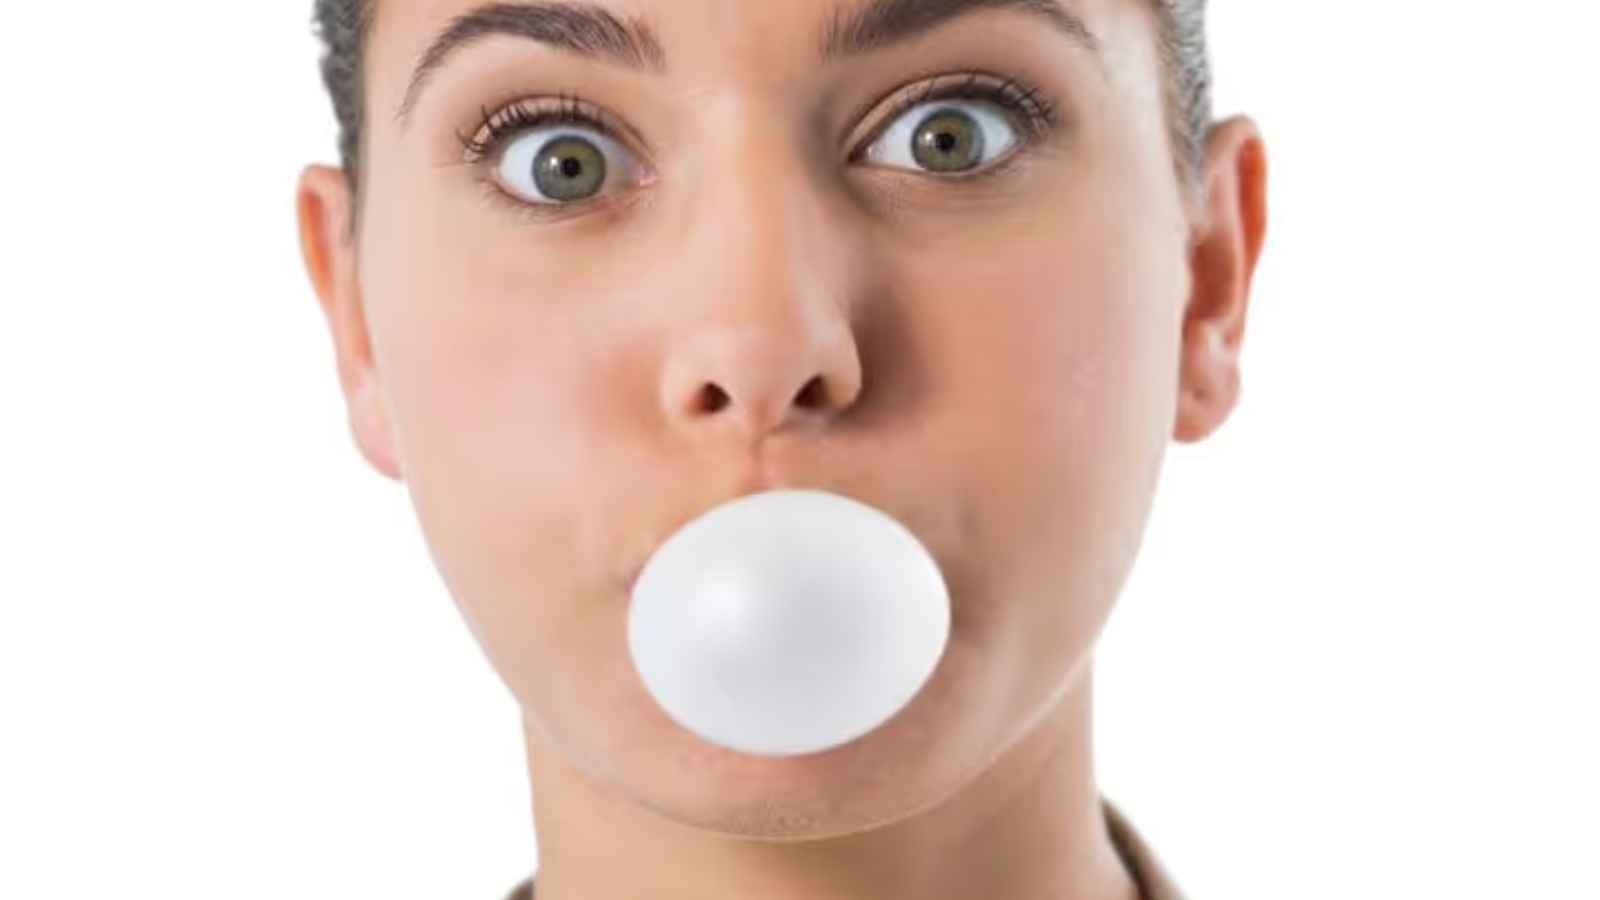 <p>Remember how your high school teacher would confiscate your gum? Singapore takes it to the next level. Importing, selling, or even chewing gum (except for therapeutic purposes) is a no-go. The Singapore chewing gum penalty is a fine of USD 500- USD 1000 on the first offence and USD 2000 for the repeat offenders. Stick to mints to keep that fresh breath.</p>